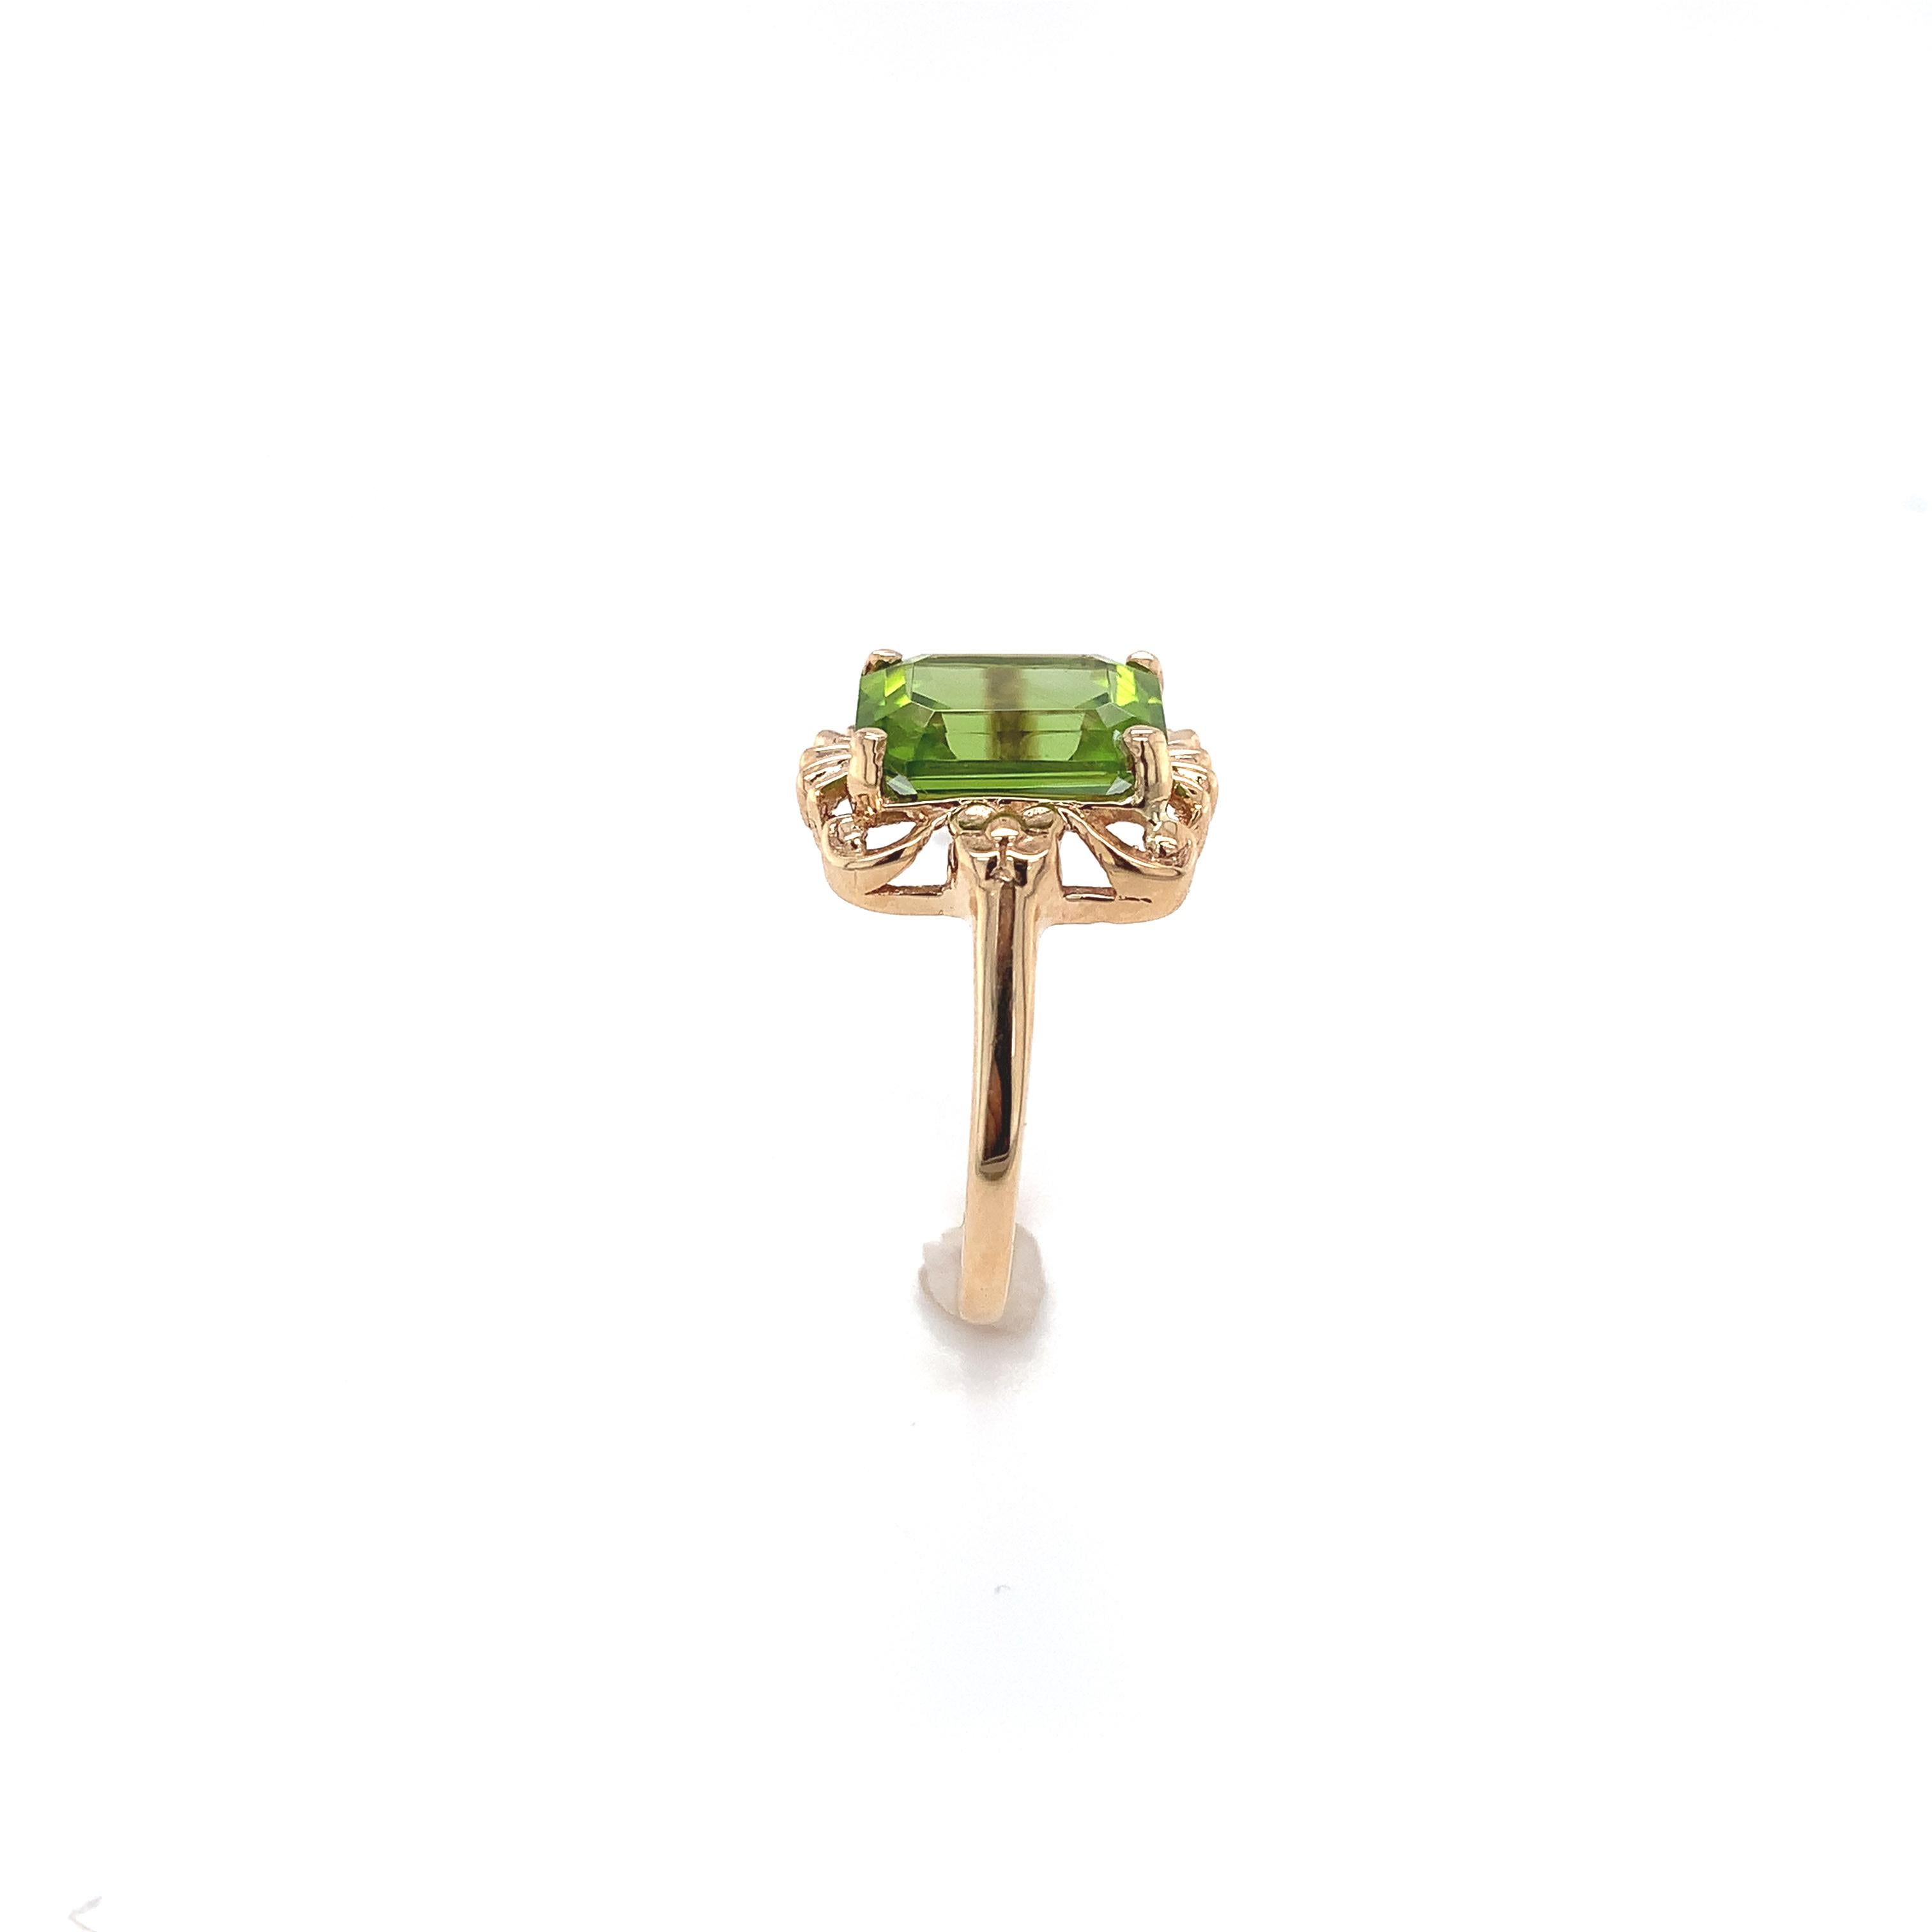 10K yellow gold ring featuring an emerald cut peridot weighing 3.73 carats. The vibrant lime green peridot measures about 10mm x 8mm. The ring fits a size 6.75 finger, weighs 1.79dwt. dates from the 1940-50's.